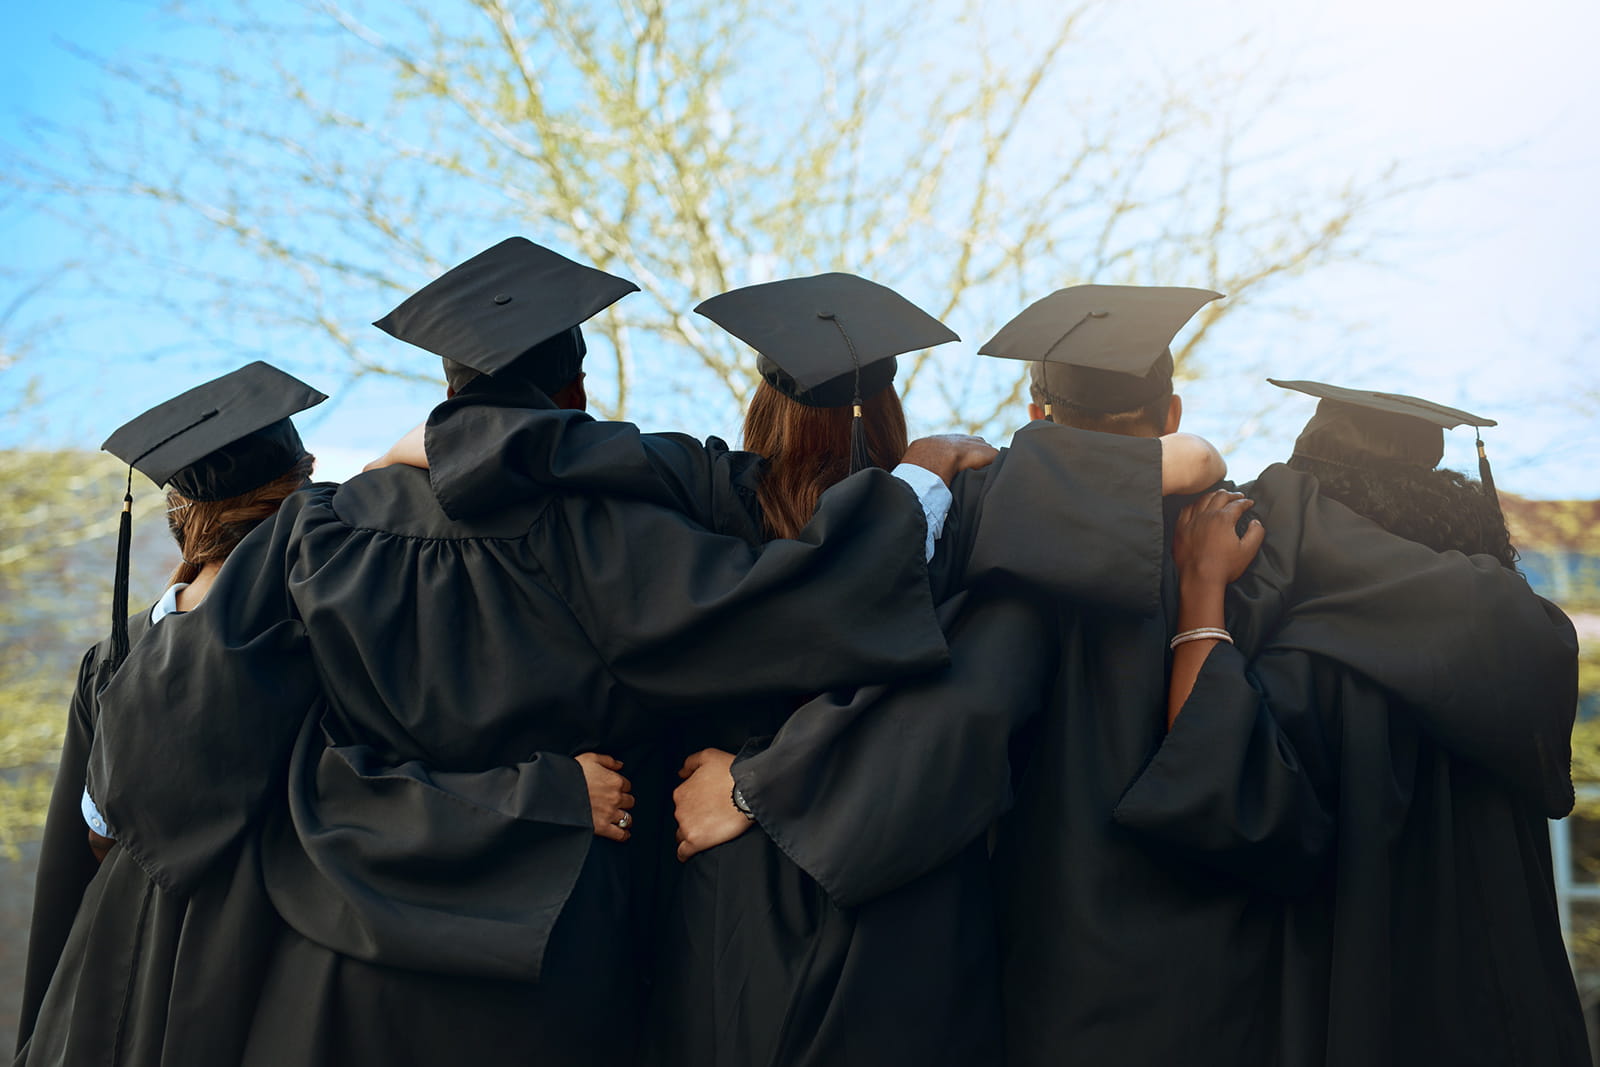 Rearview shot of a group of young students embracing on graduation day